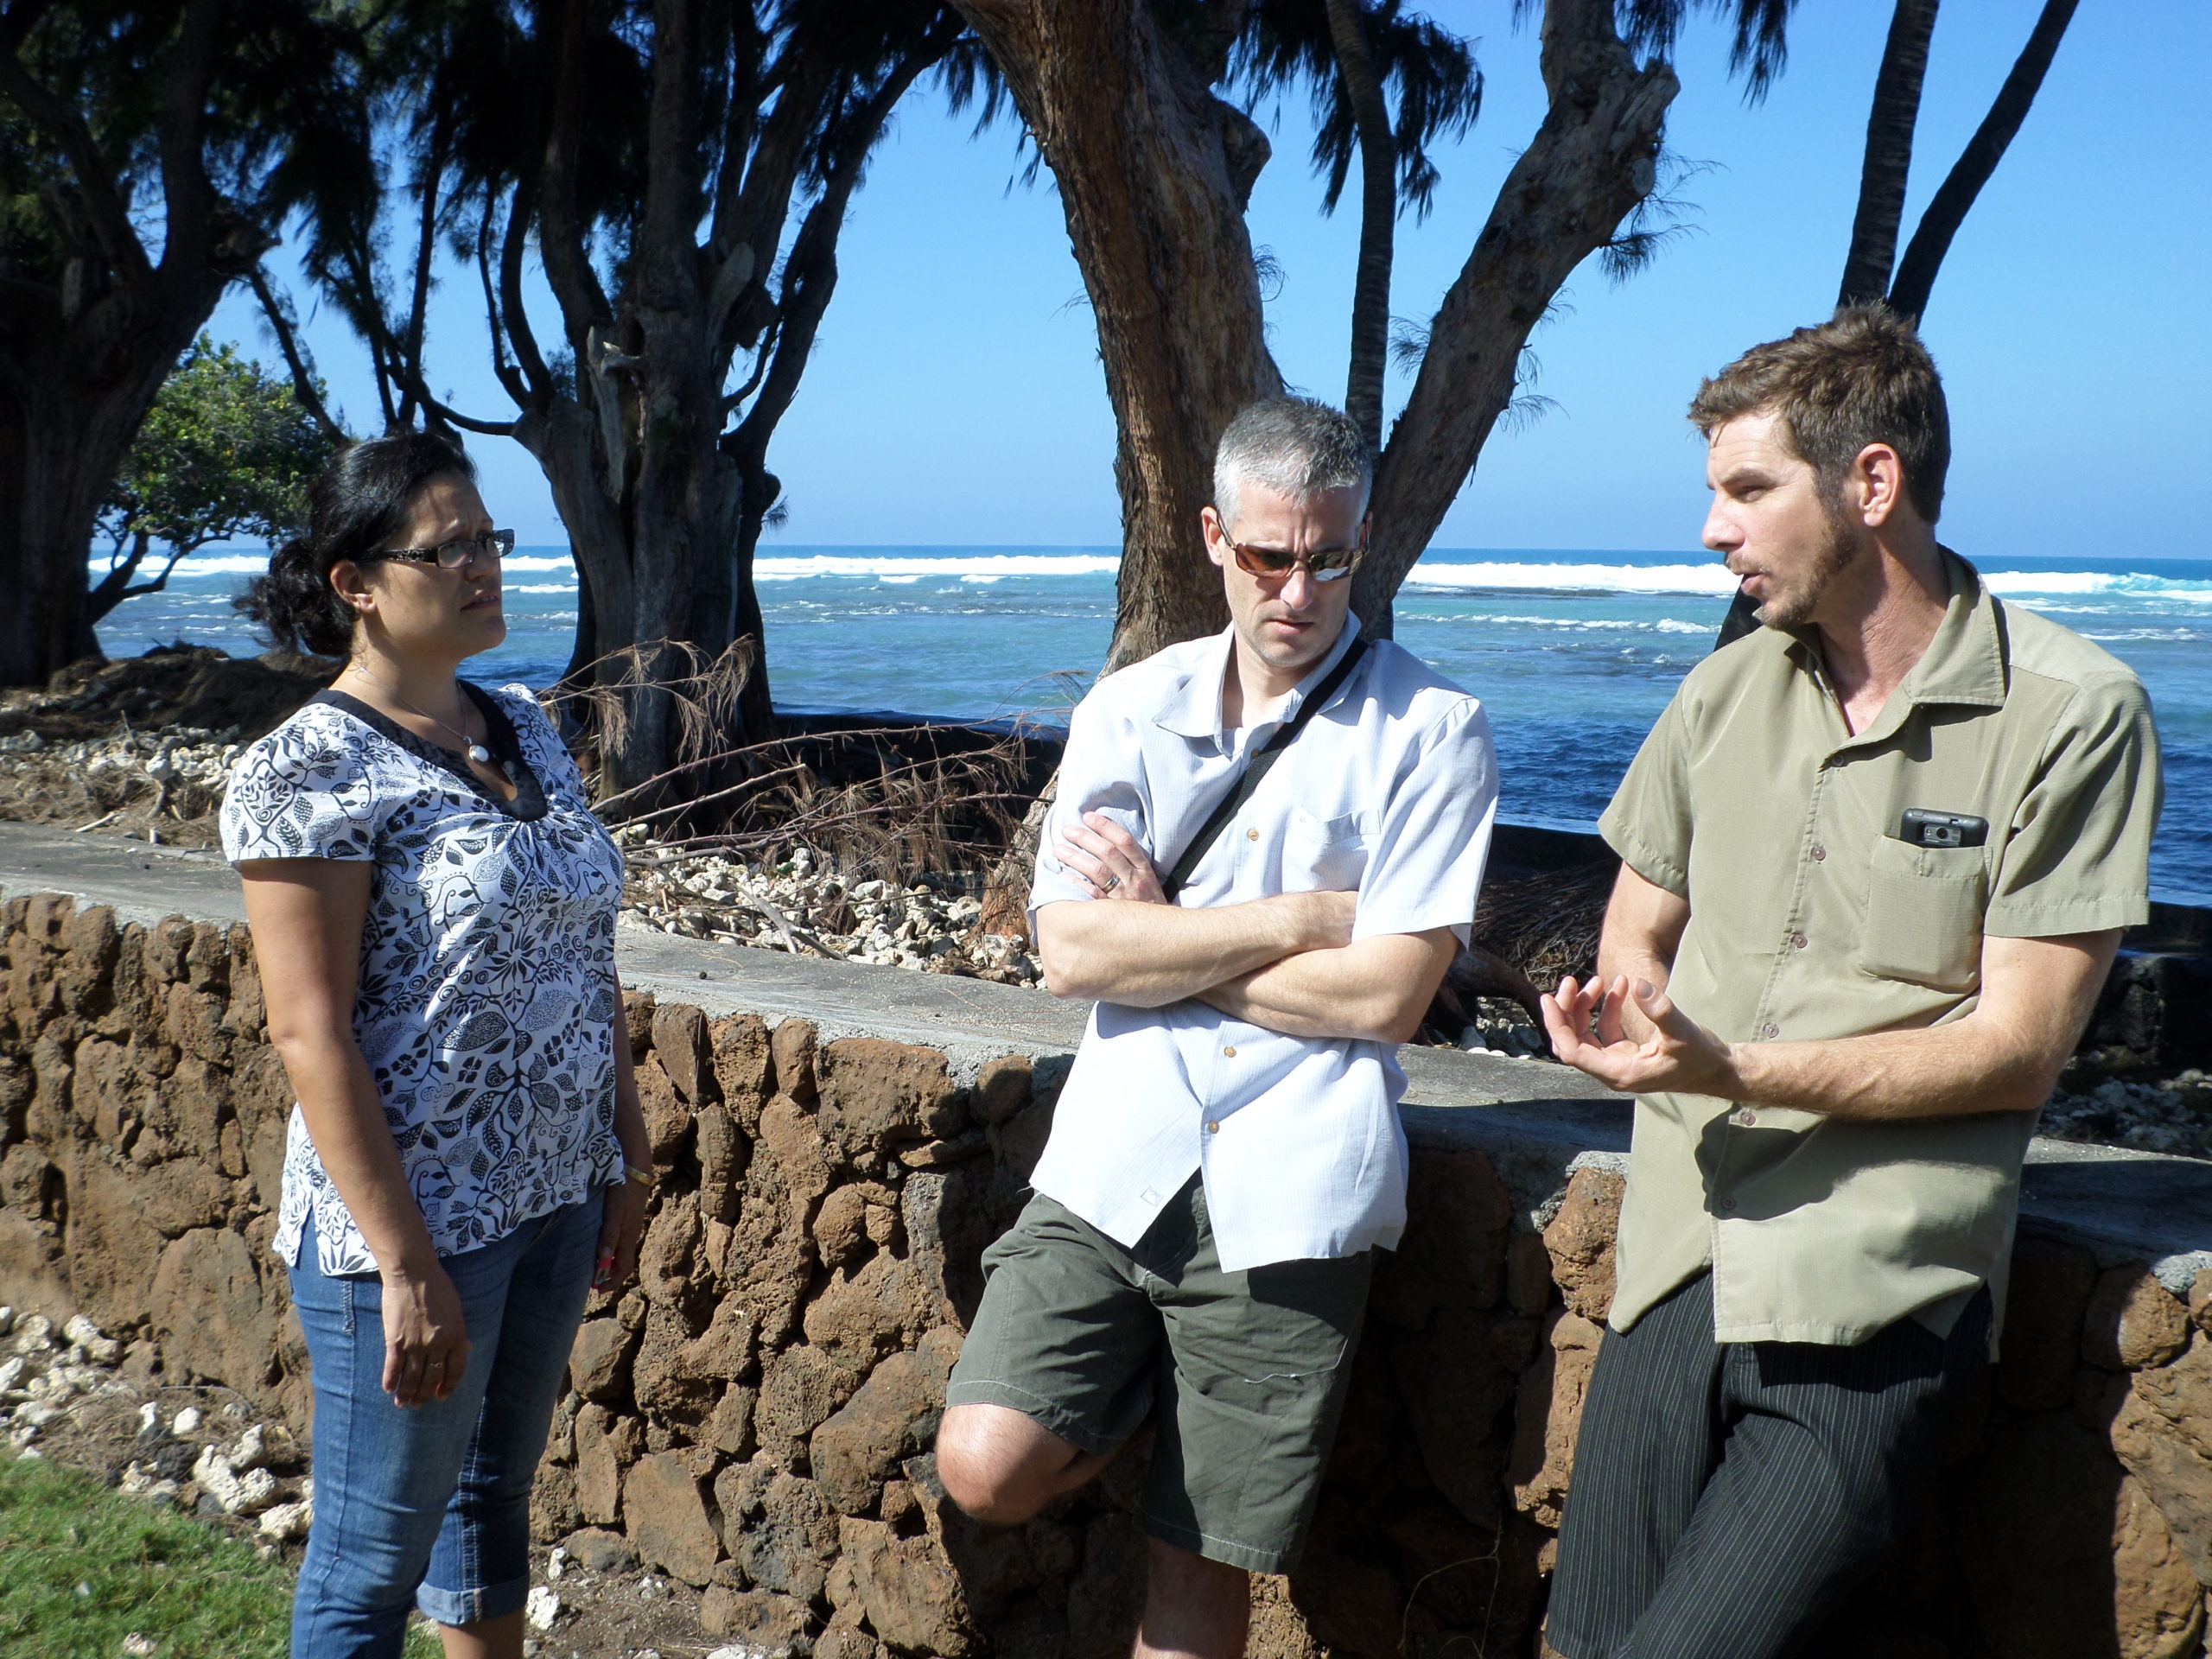 Hawai'i Field Managers Erica Perez (left) and Wes Crile (right) talk about the threats to Puako's coral reefs with Conservation Programs Director Jason Vasquez